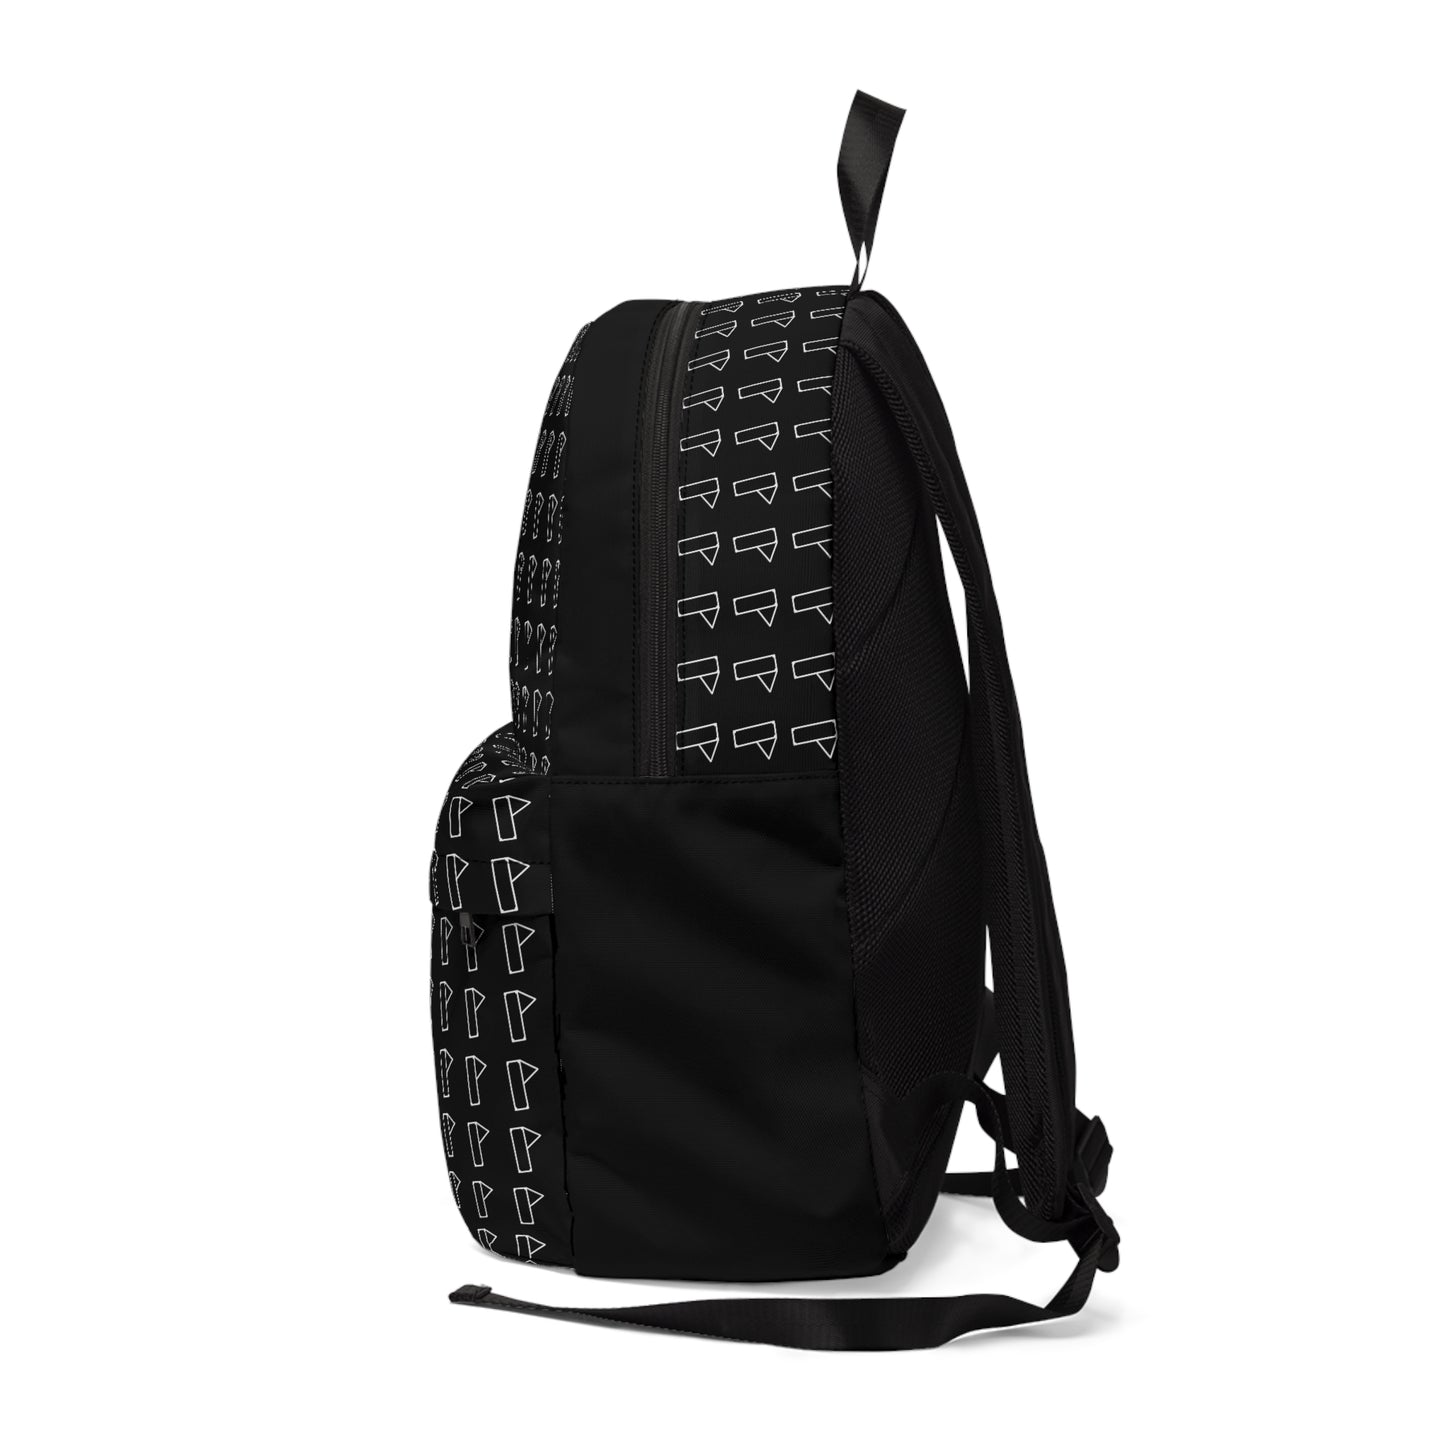 PamPro Inc. Classic Backpack